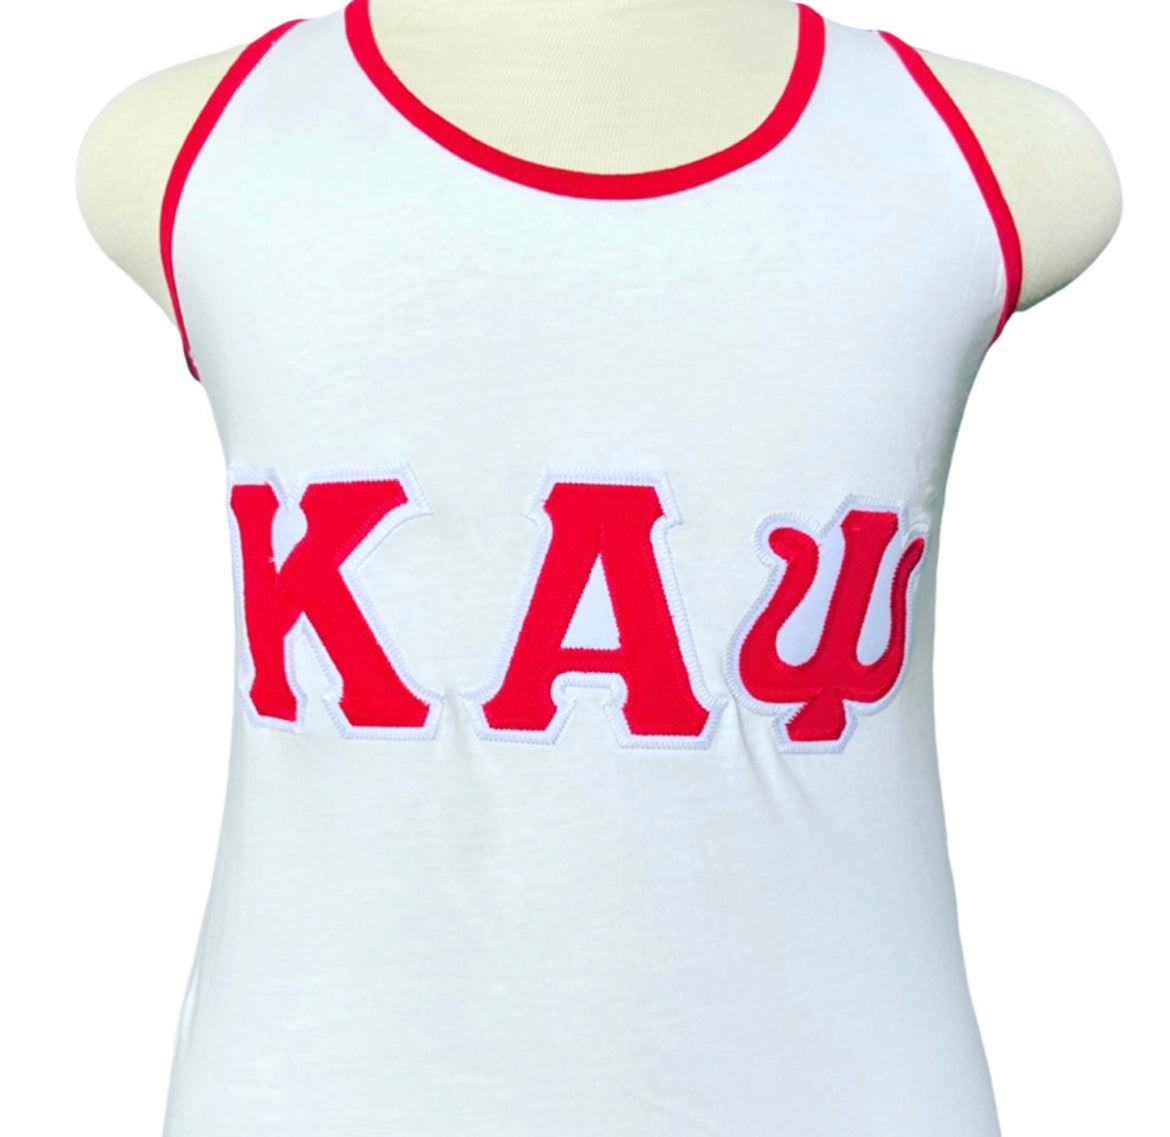 Exclusive Kappa Alpha Psi Tank Top . This is the perfect short-sleeved shirt to wear while showing off your Kappa Alpha Psi fraternity lettering. A comfortable 100% cotton tee with a twill Greek letters embroidery across the chest give you the perfect fit. This shirt is also a perfect gift for your favorite Kappa Man.